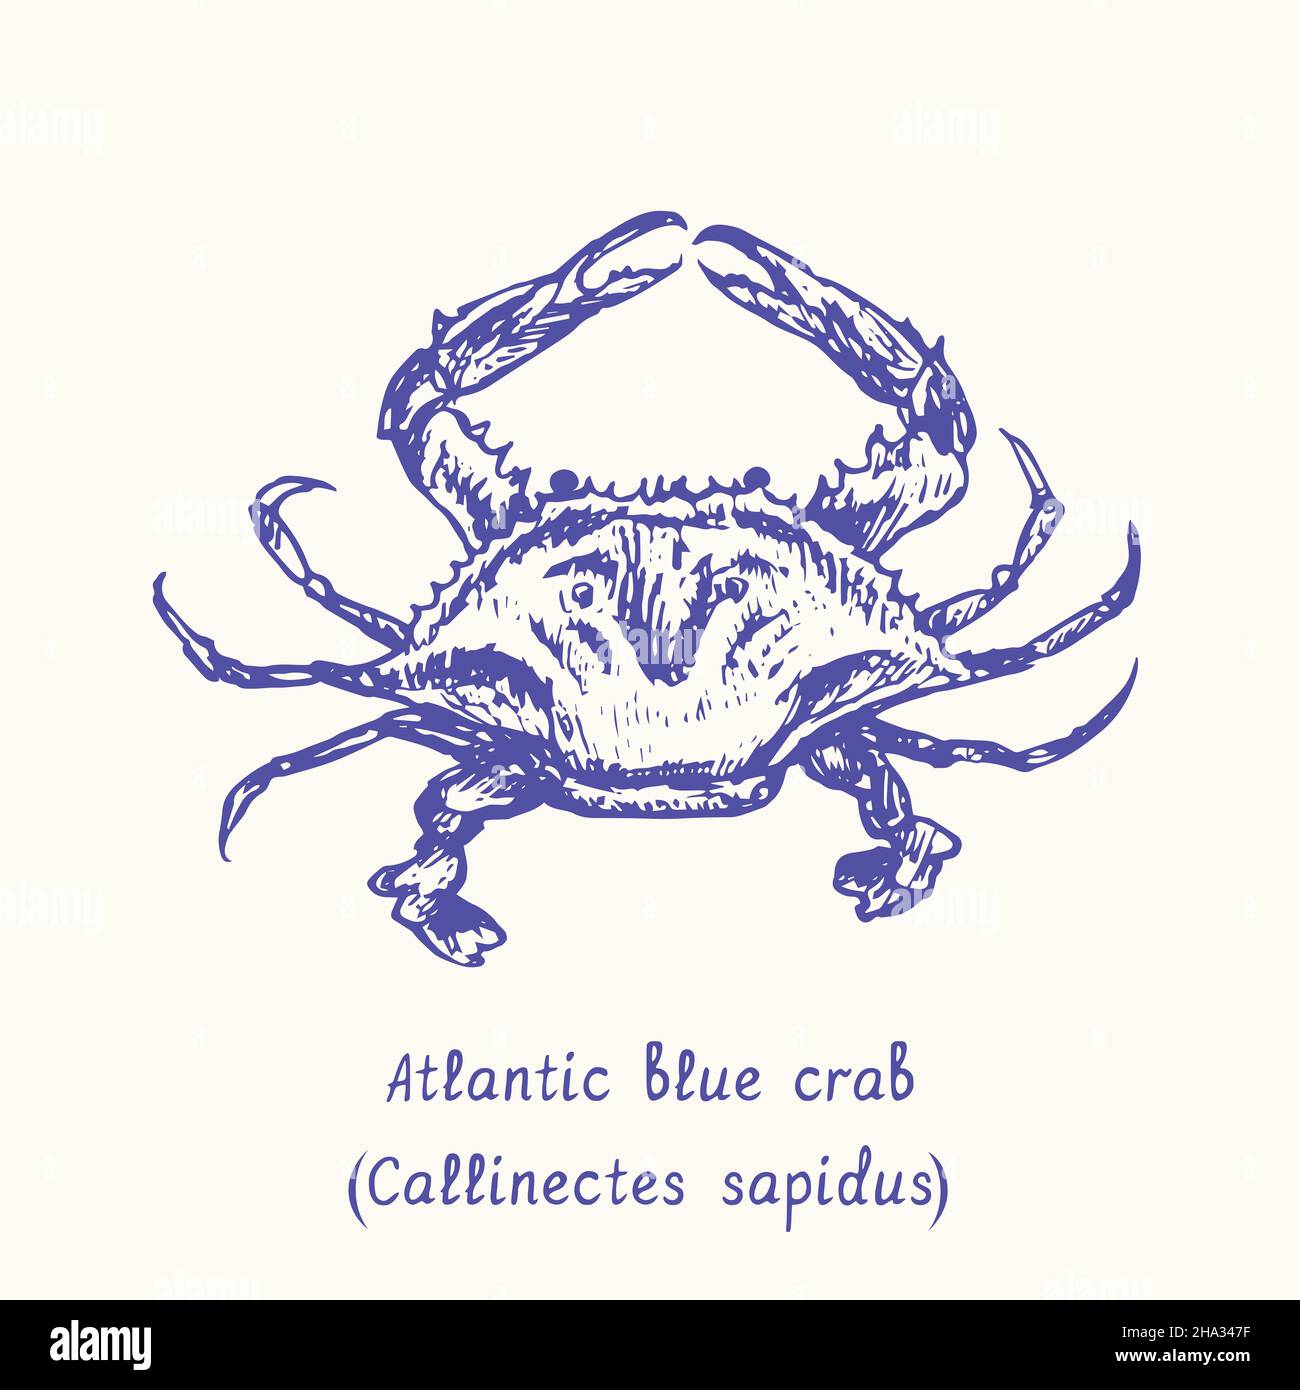 Atlantic blue crab (Callinectes sapidus) top view. Ink black and white doodle drawing in woodcut style with inscription. Stock Photo